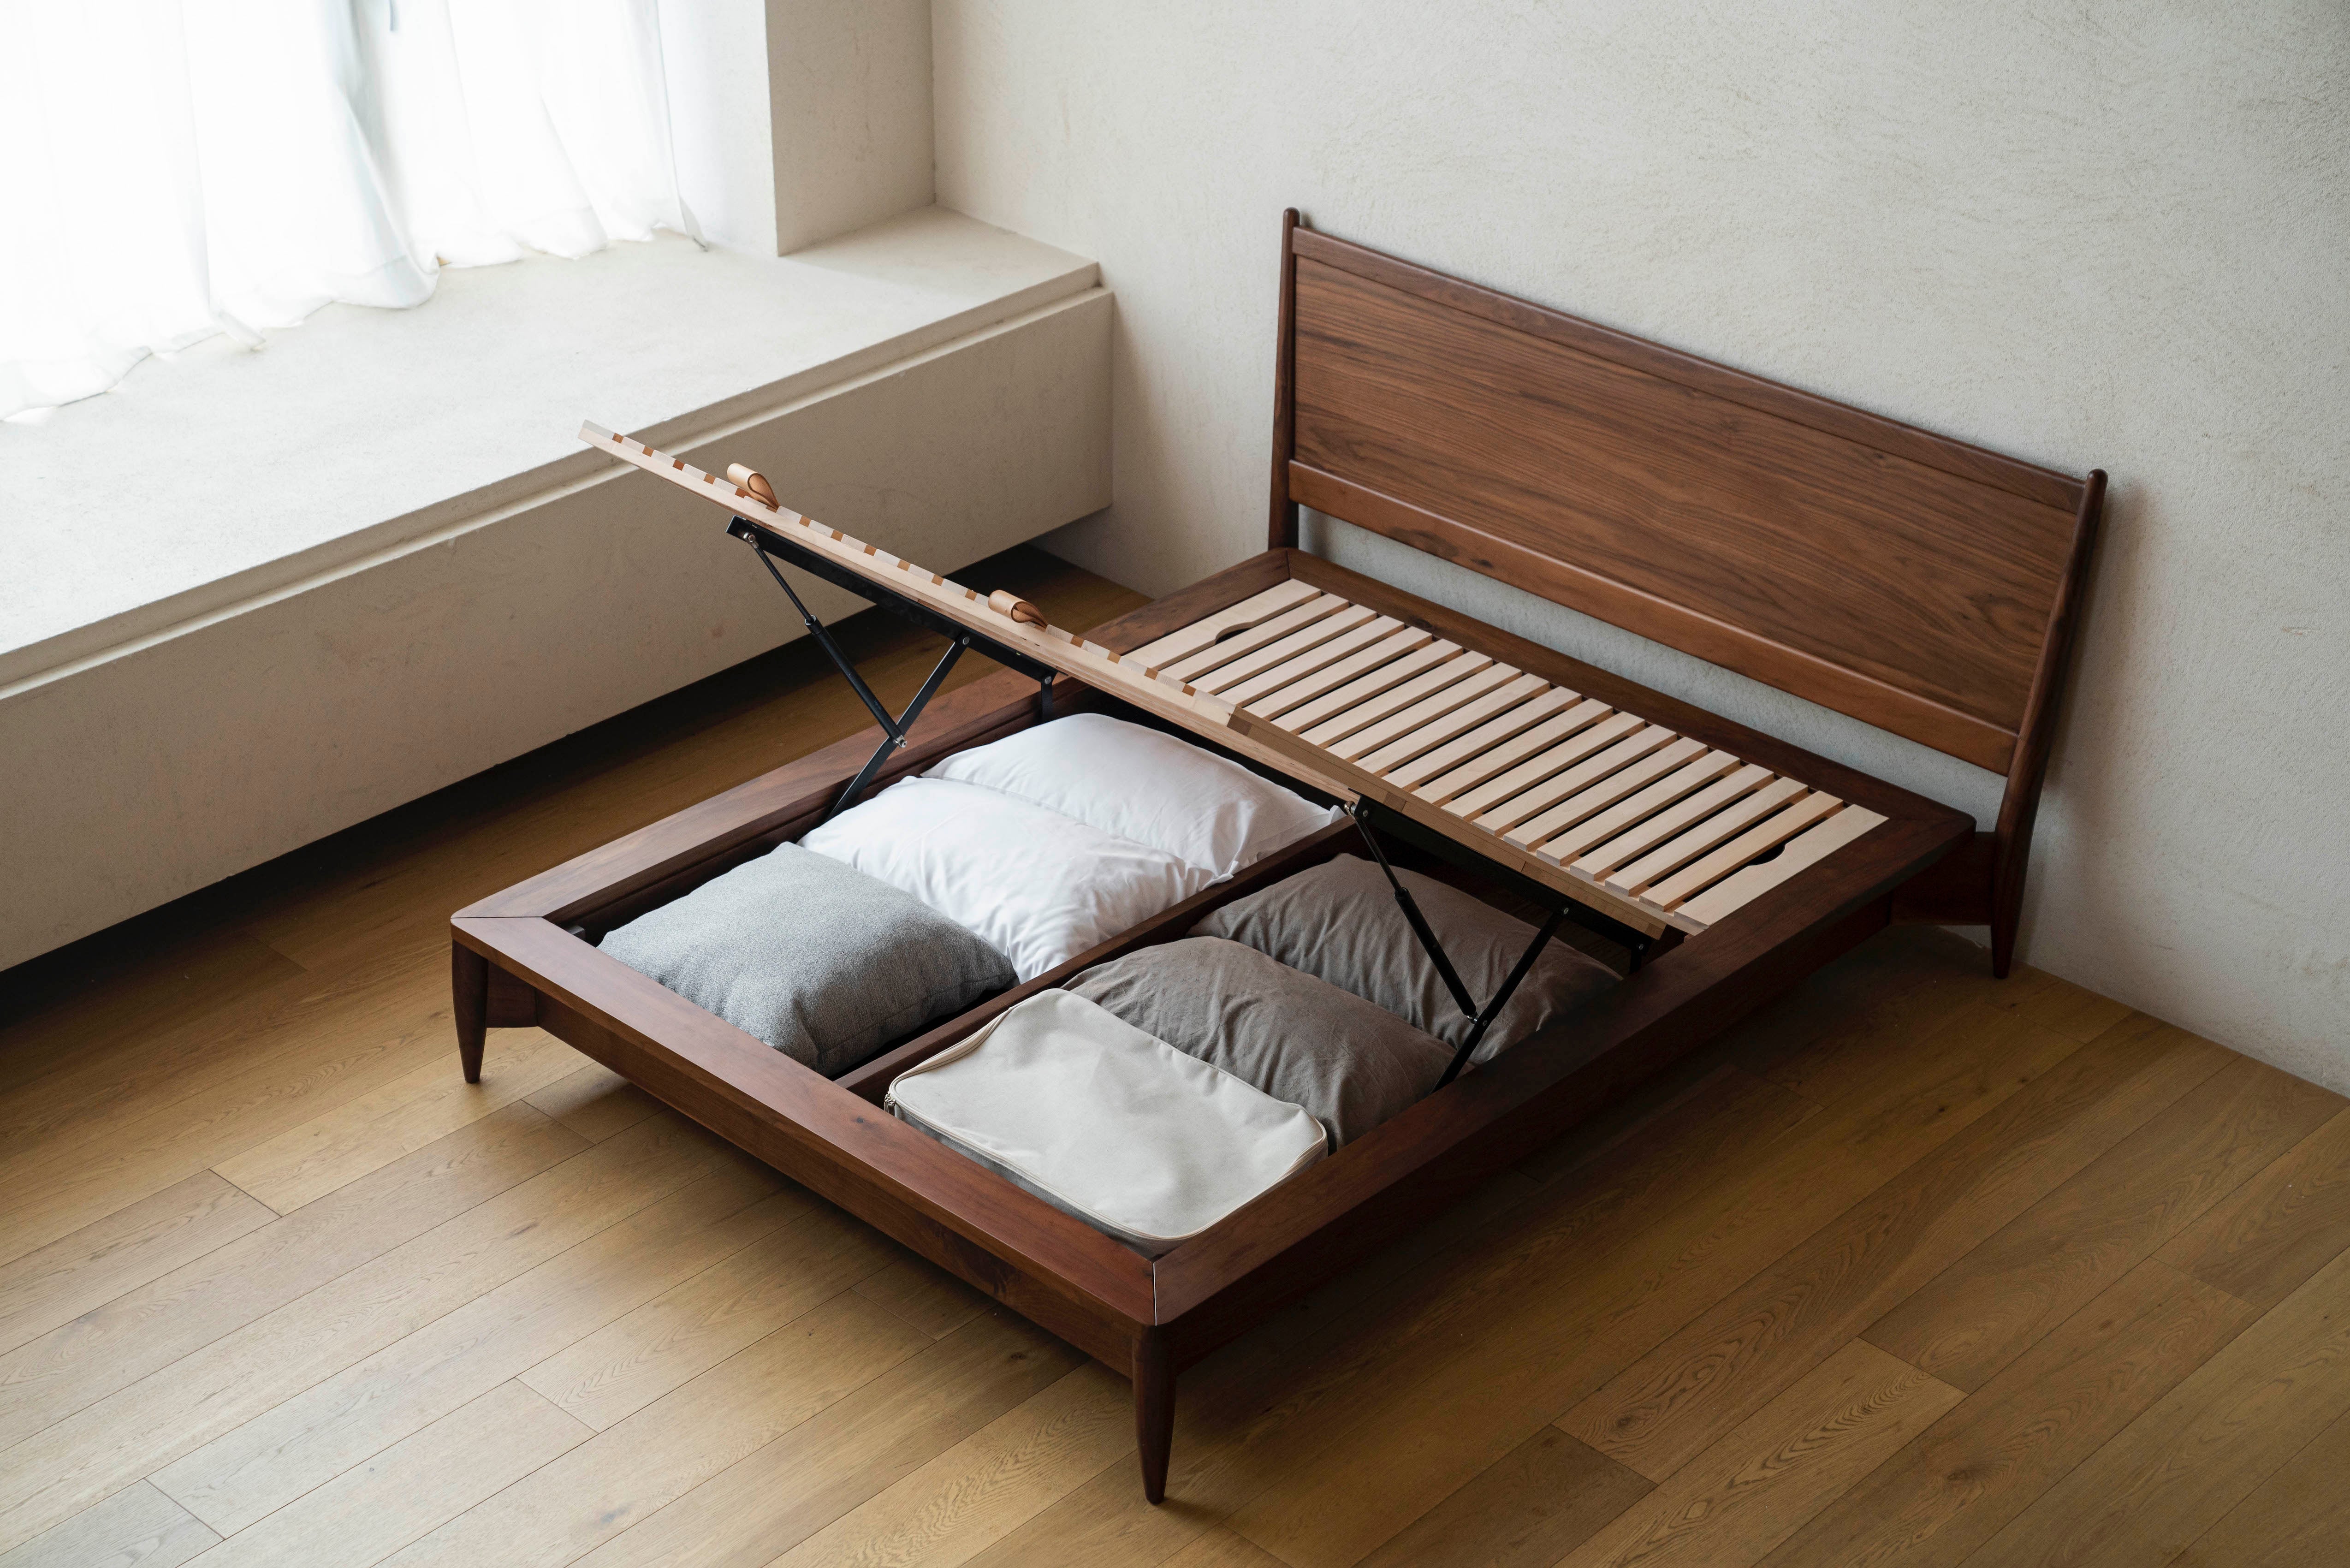 HOLD BED (XL) Bed ziinlife 